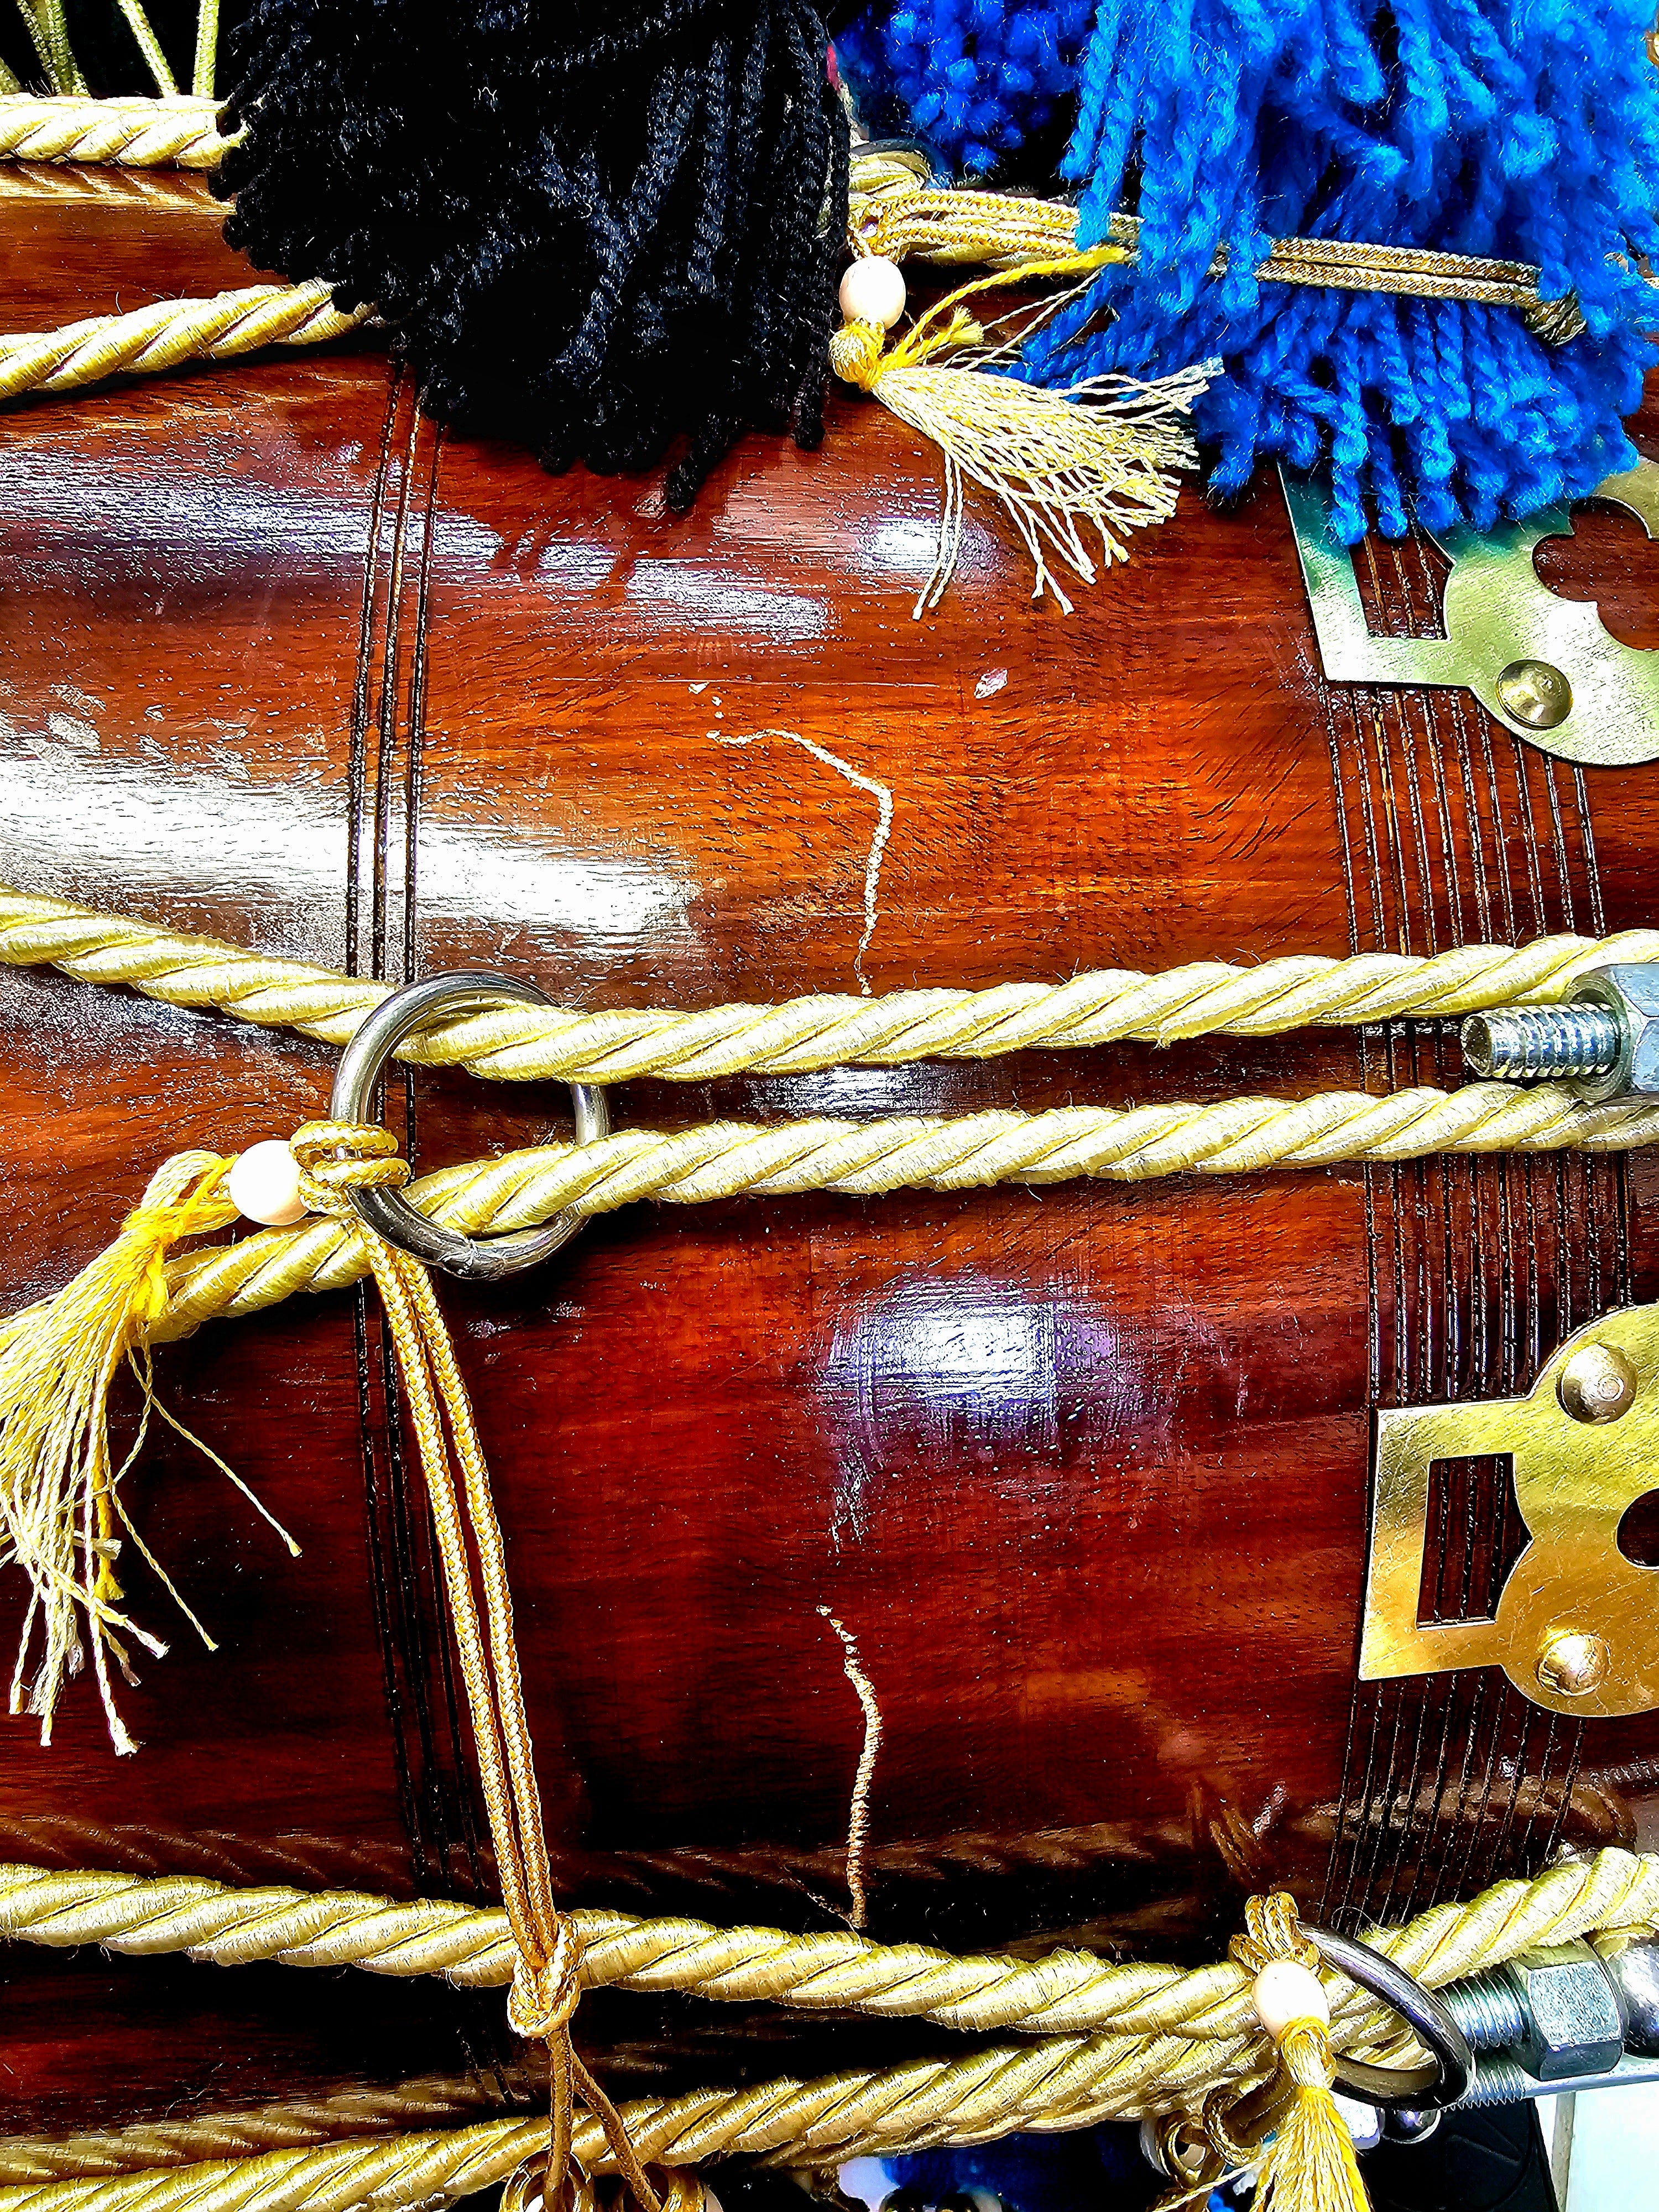 Royal Resonance: Red Sheesham Bolted Punjabi Dhol - 12" Bass, 12.5" Treble, Golden Ropes with Blue and Black Tassels *Minor Exterior Defects*